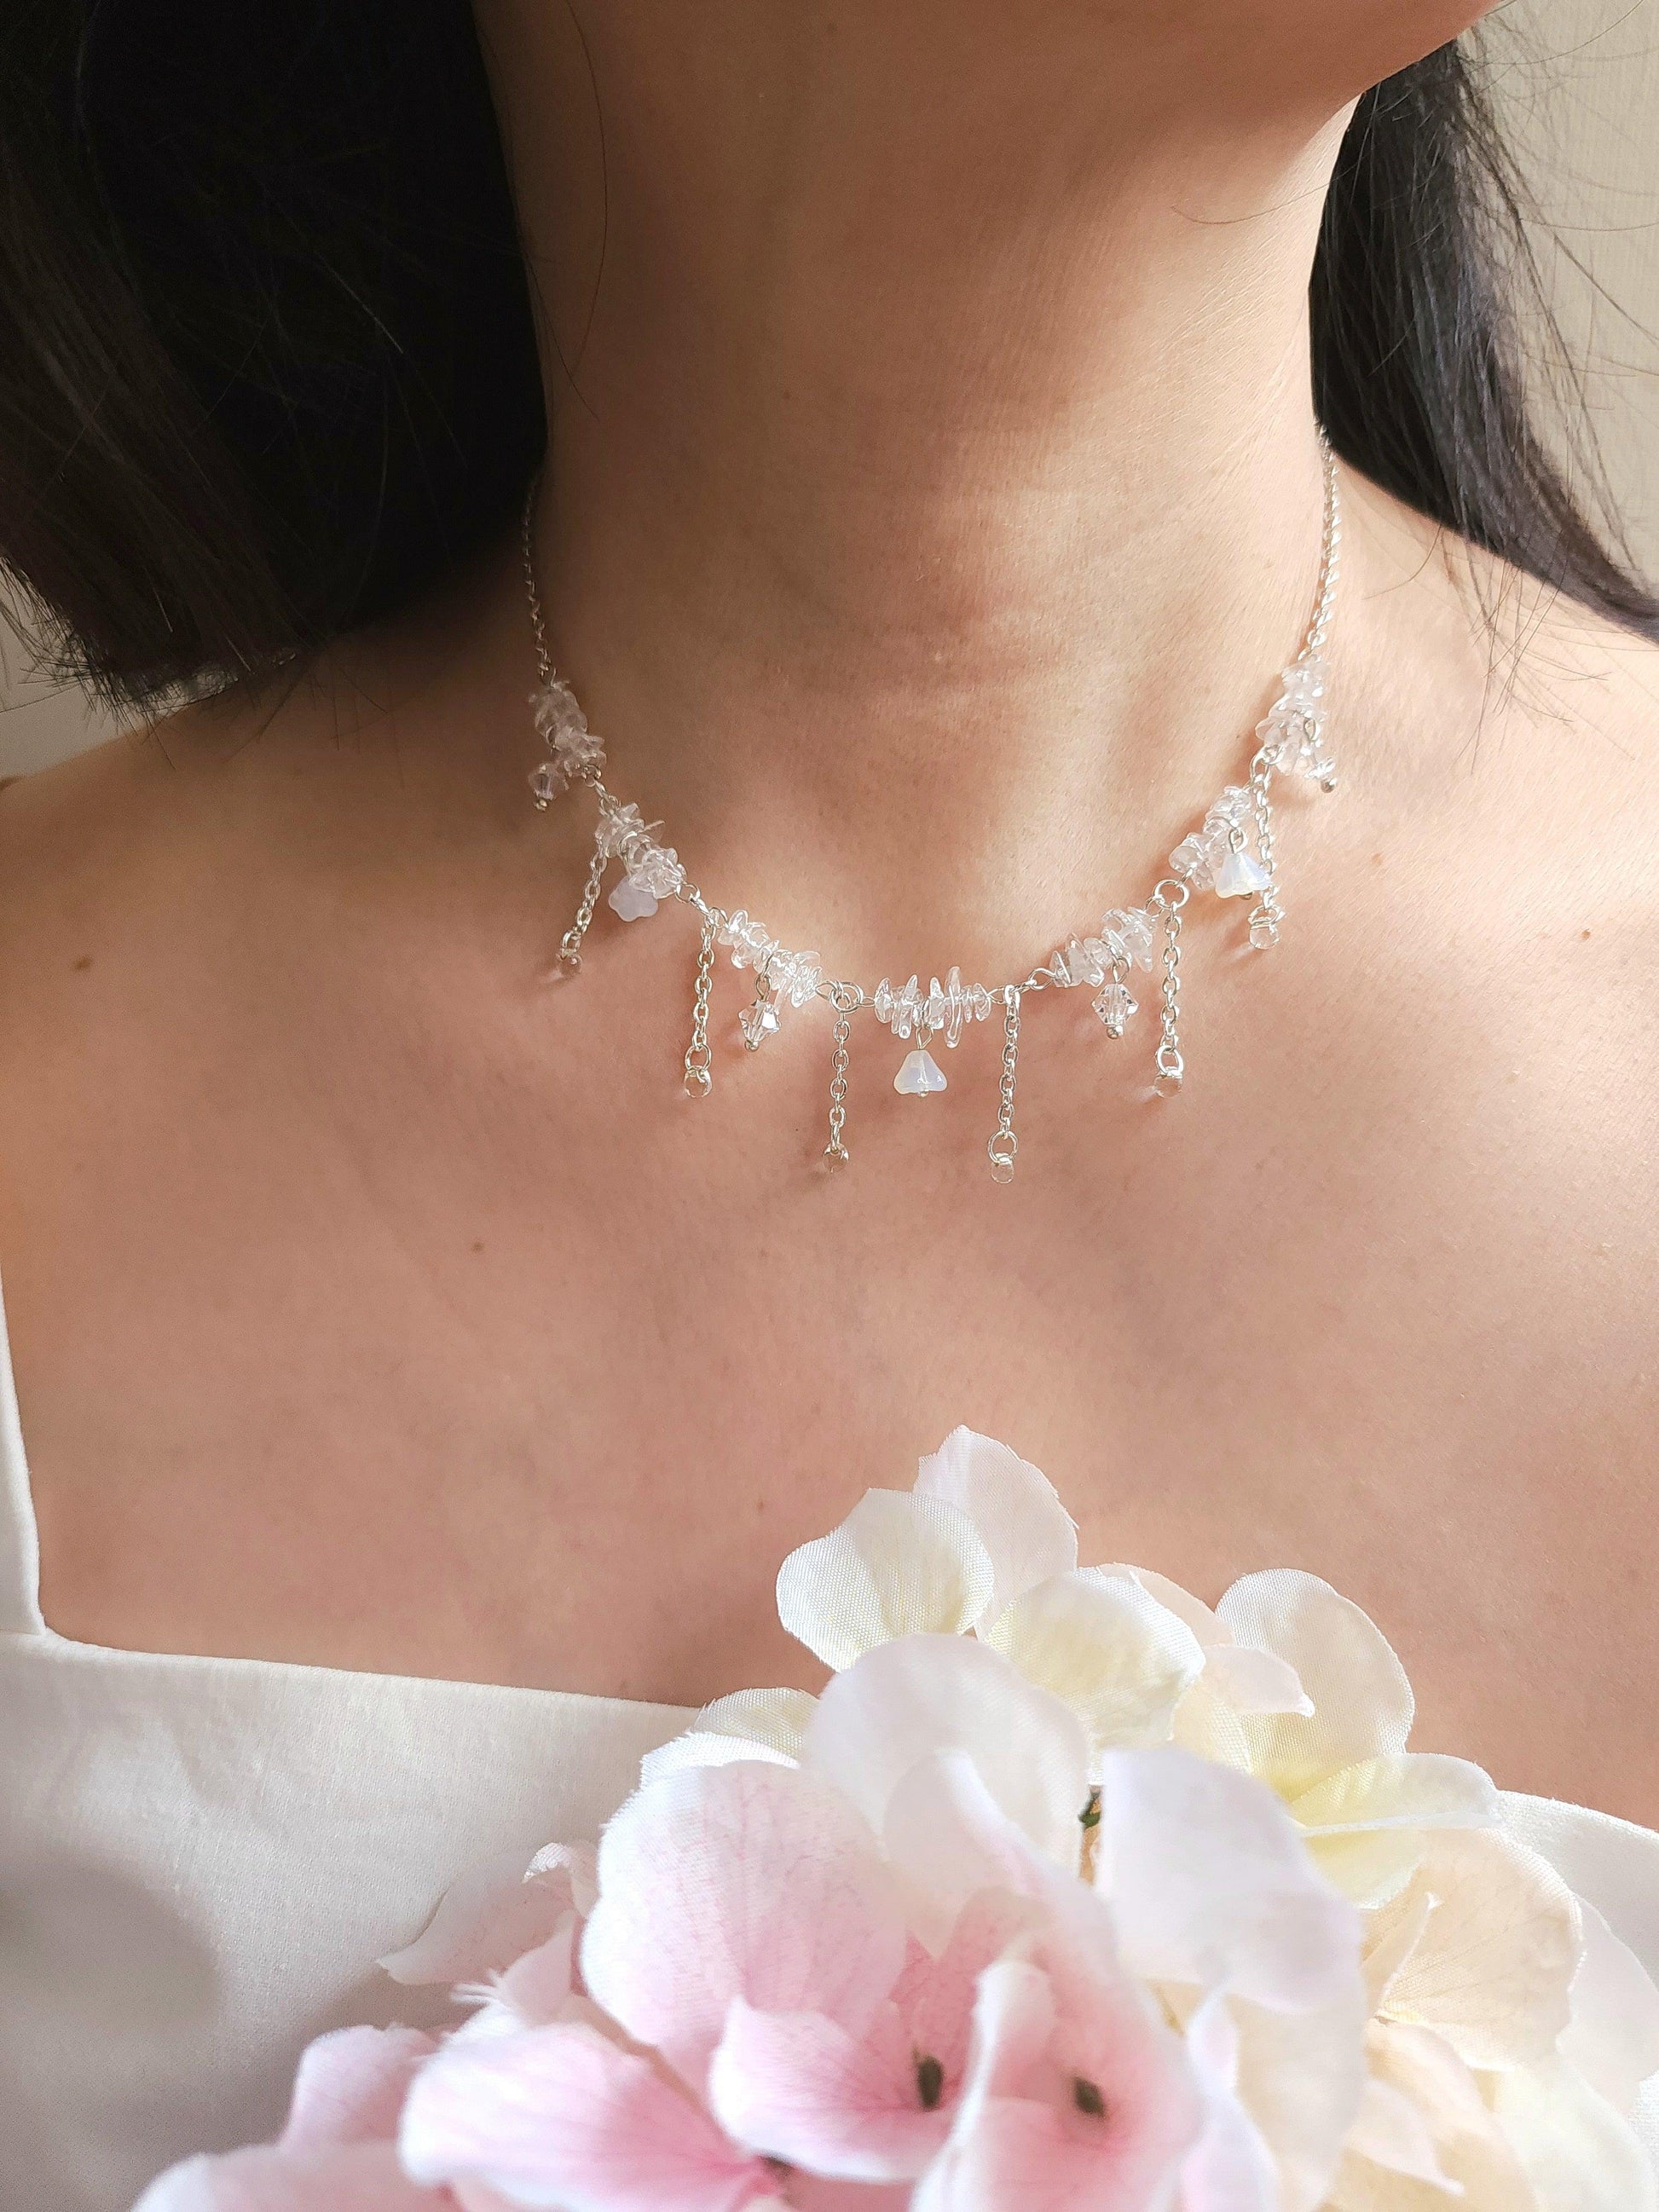 Frost Quartz Necklace - By Cocoyu